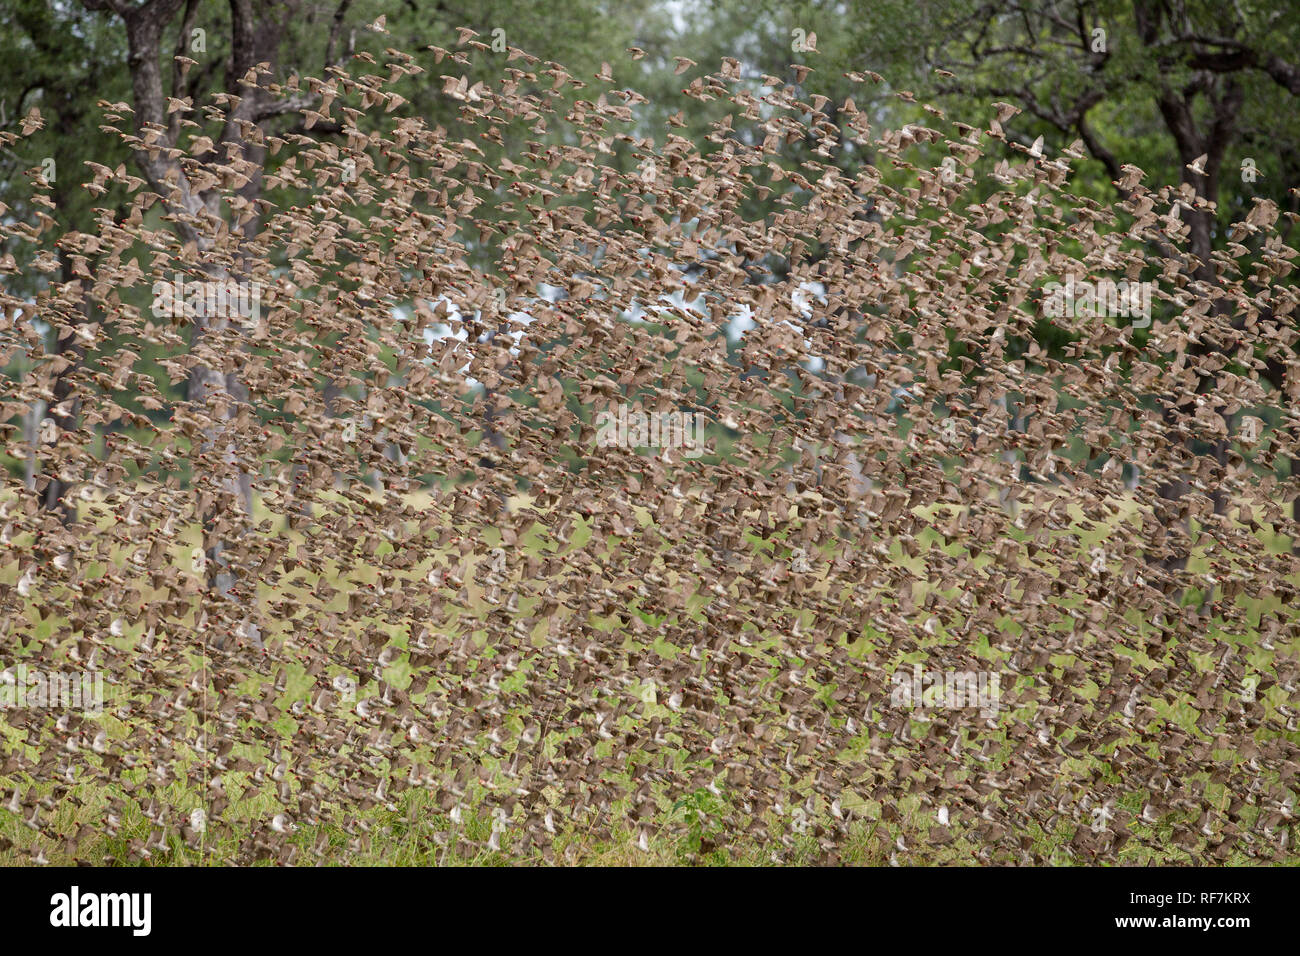 Red-billed Quelea, Quelea quelea, are migratory birds that swarm in enormous flocks, seen here in South Luangwa National Park, Zambia. Stock Photo